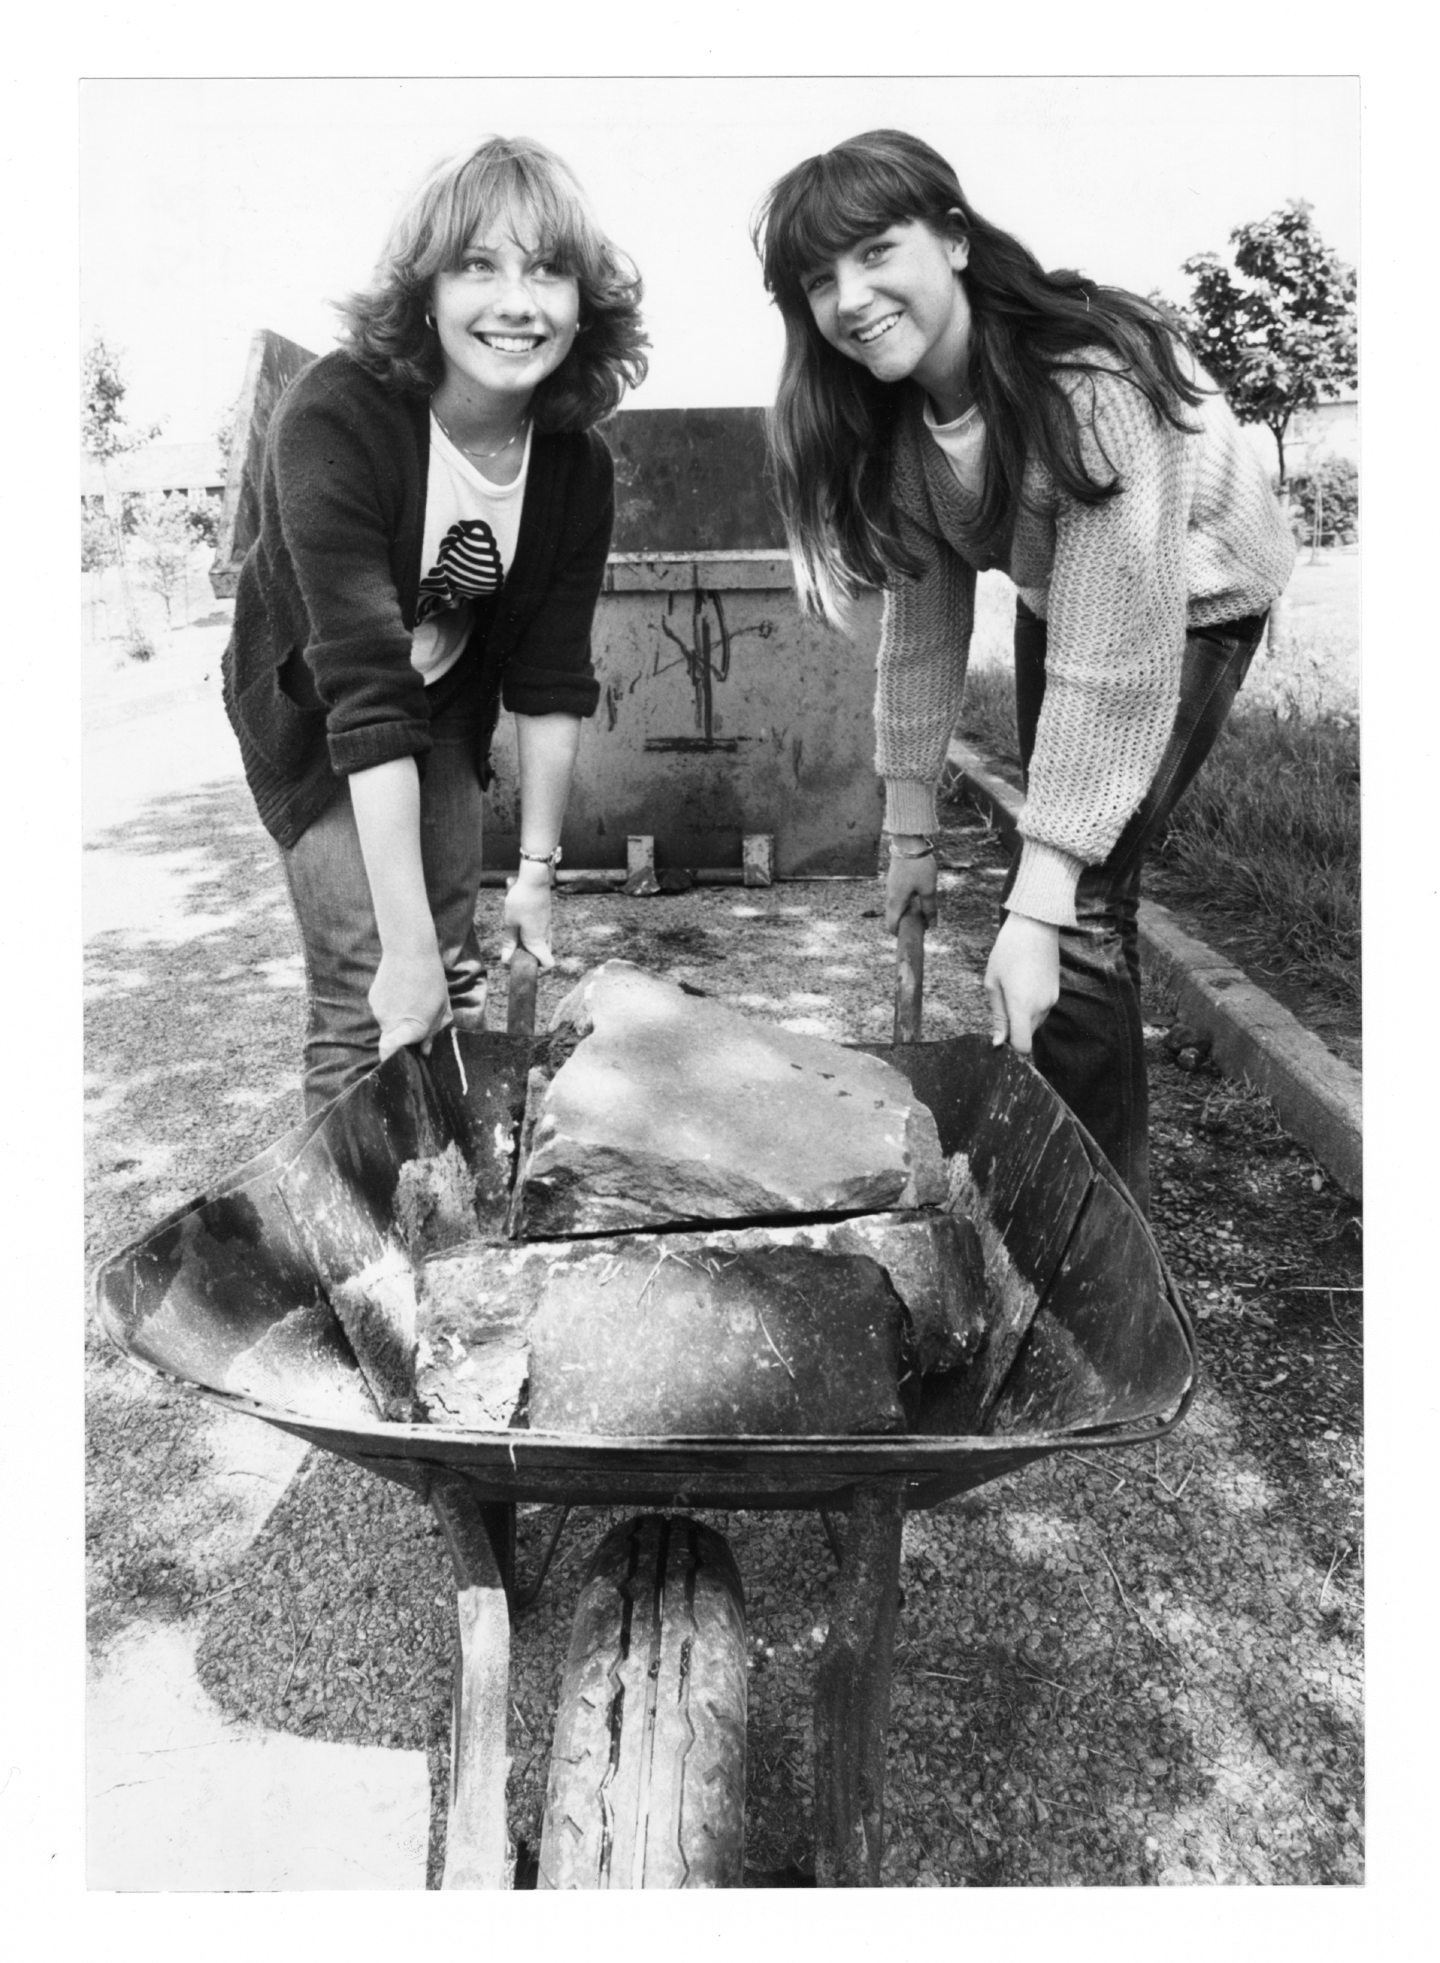 Smiles from Angela Manson and Paula Hepburn, both 15, as they press on with their share of the work in the community project in 1981.